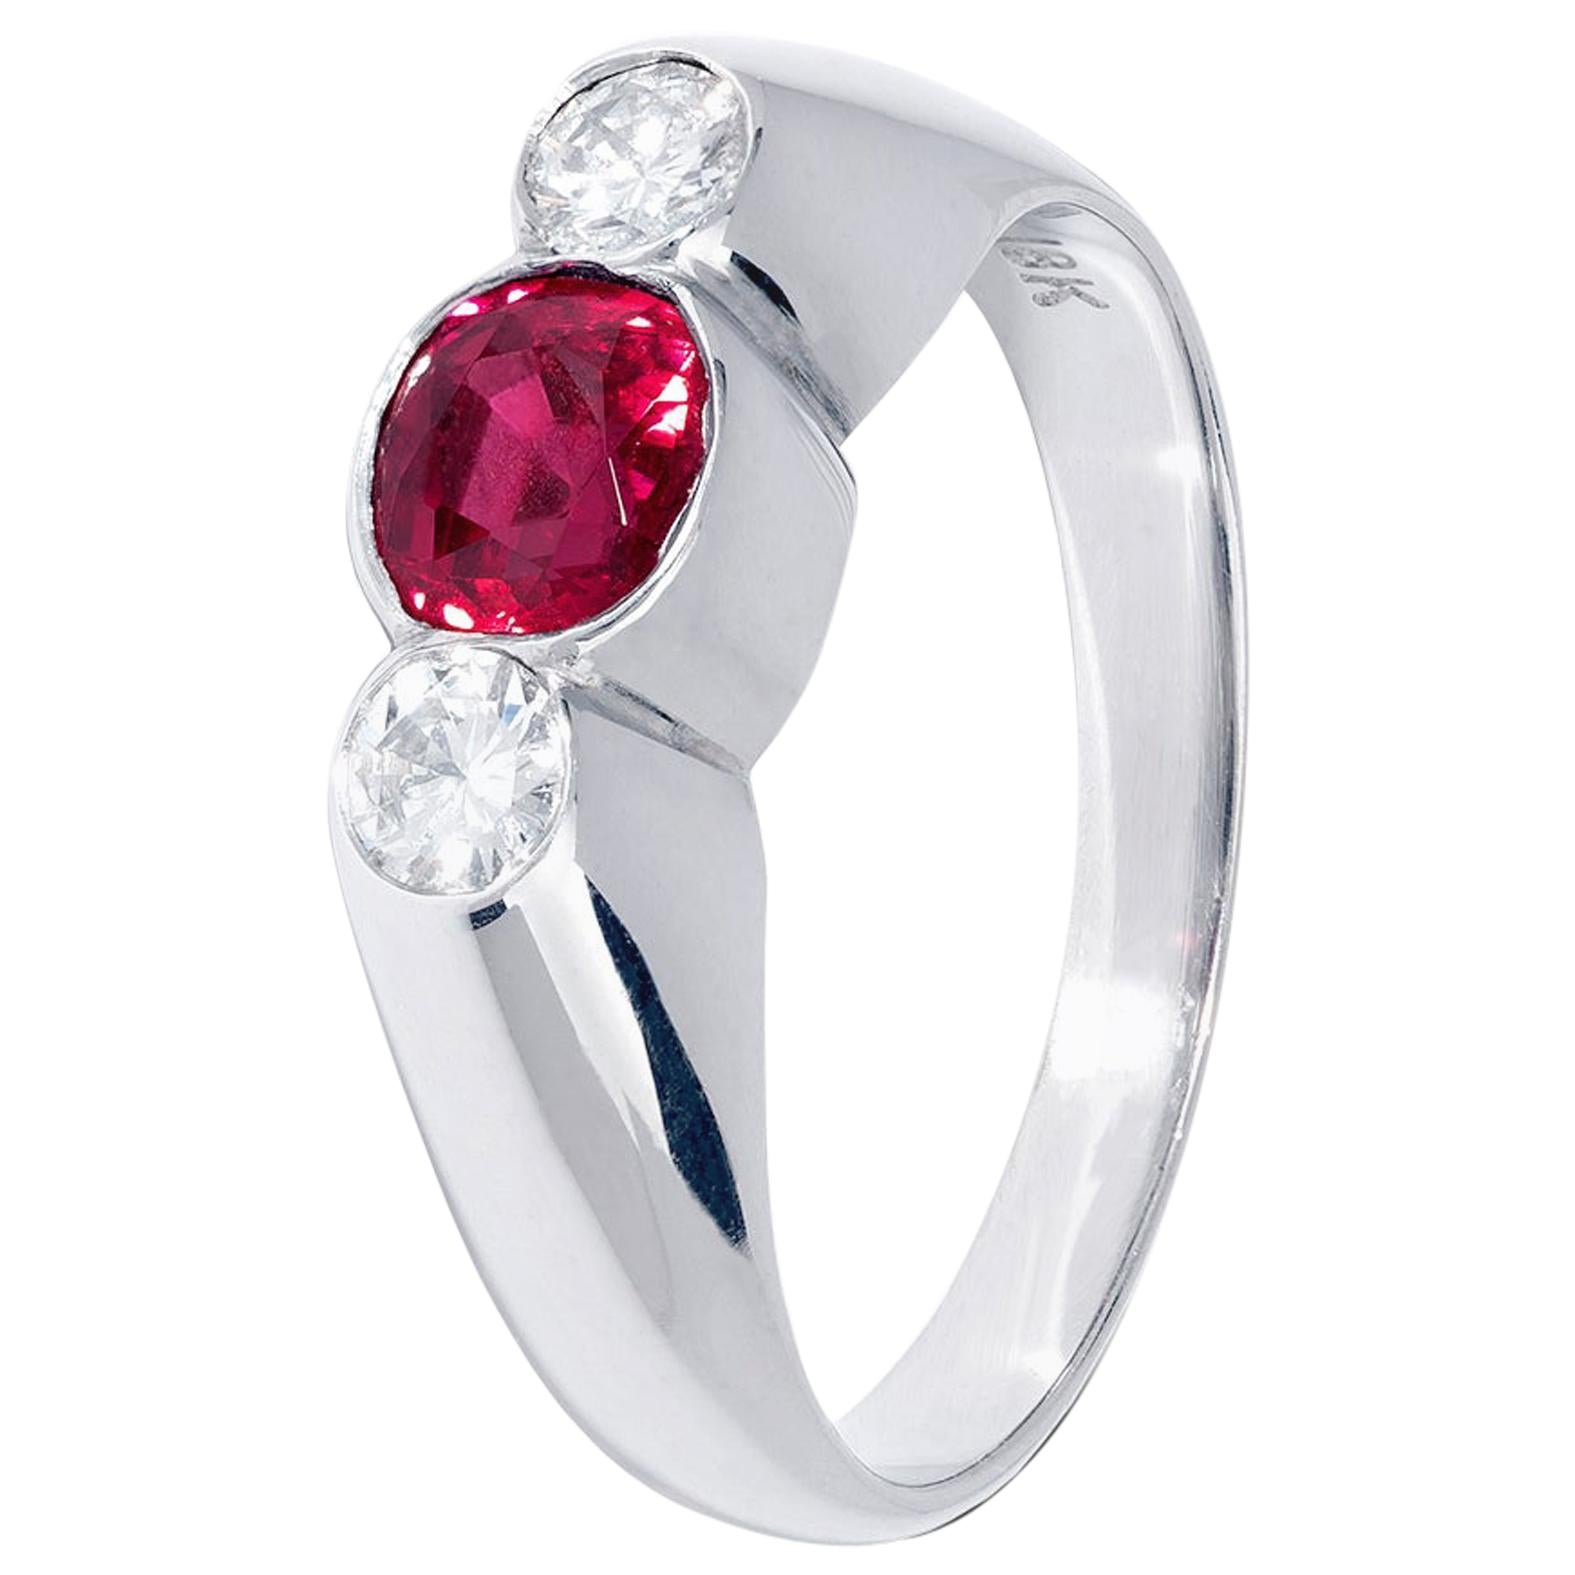 Exceptional Ruby and Diamond Three-Stone Ring